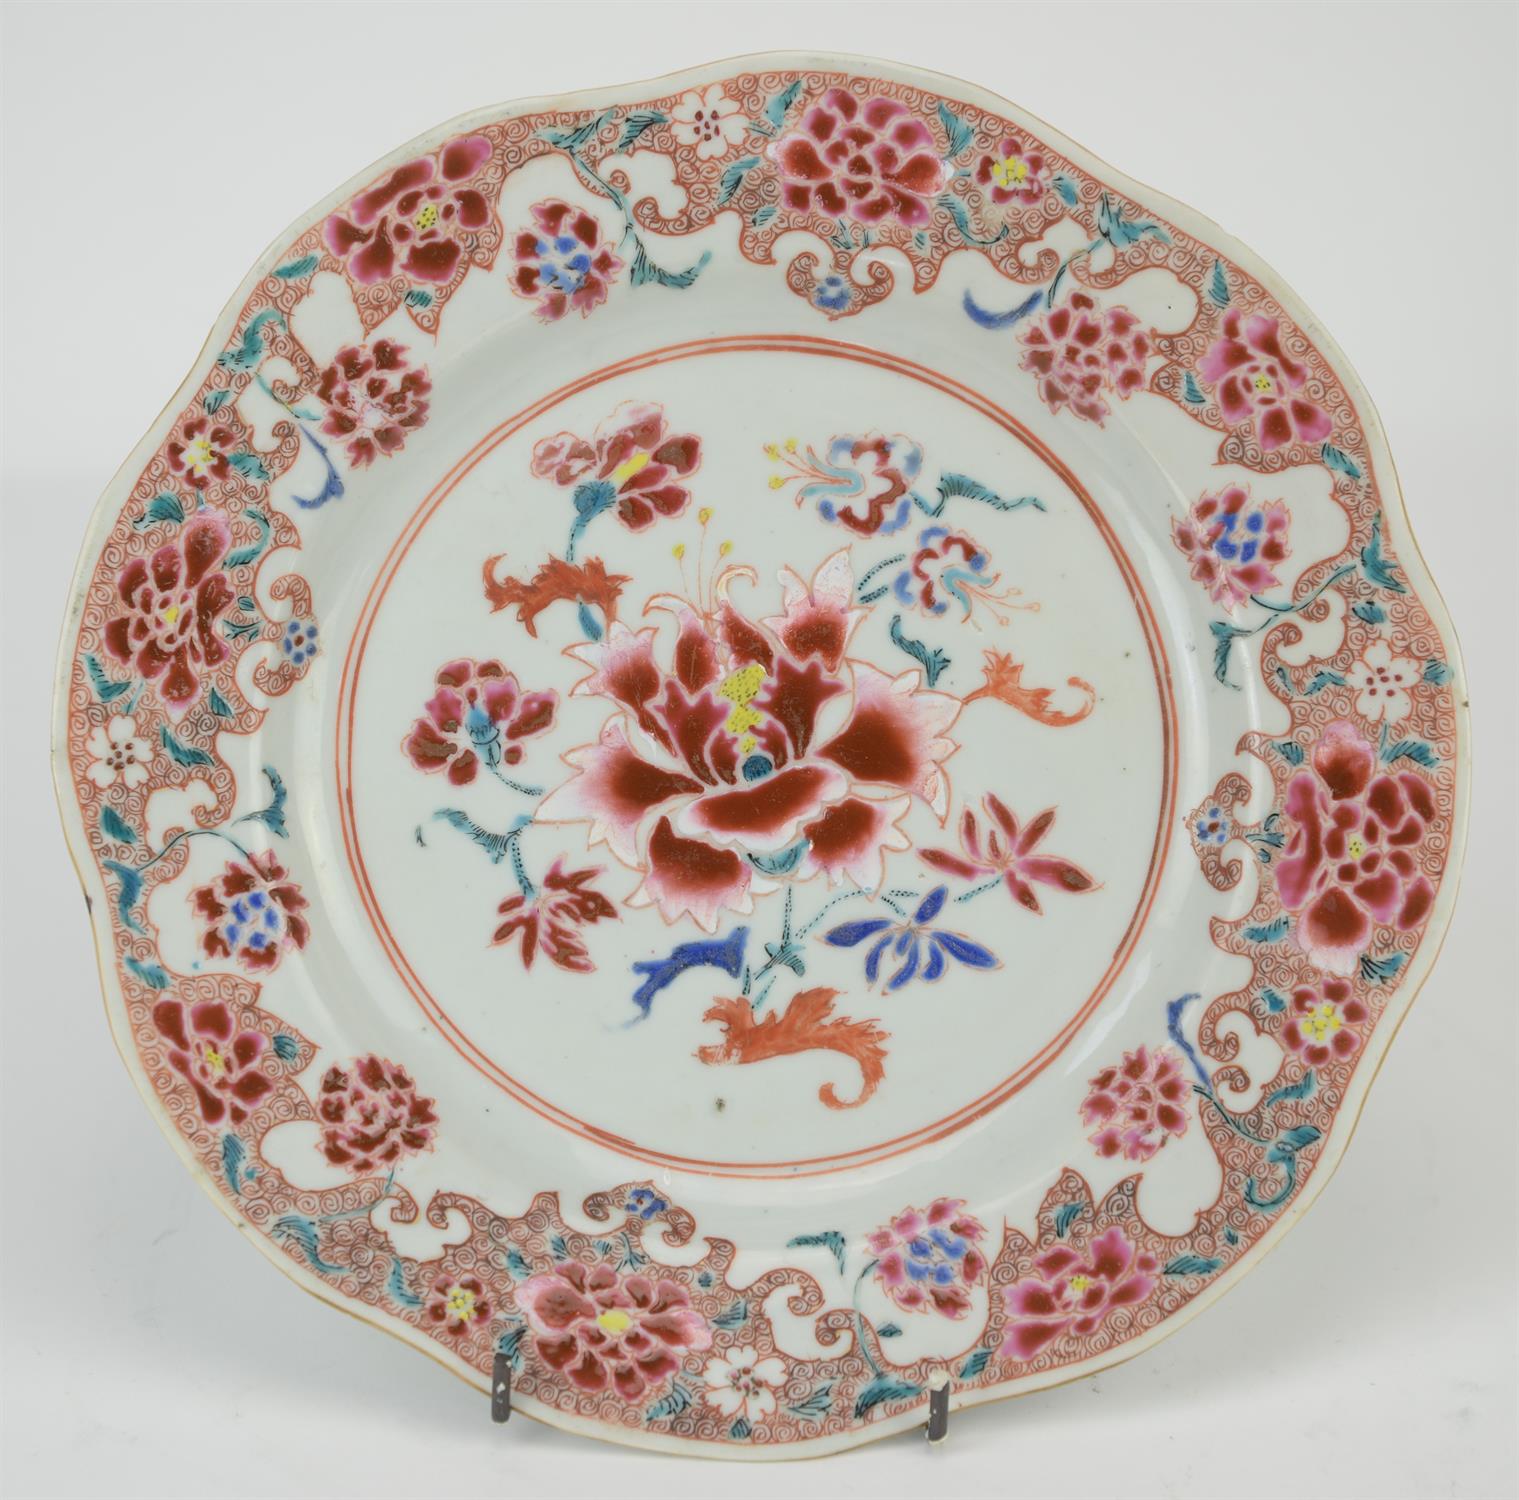 Eight famille rose dishes; each one decorated with floral designs and about 22.5 cm diameter, - Image 25 of 28